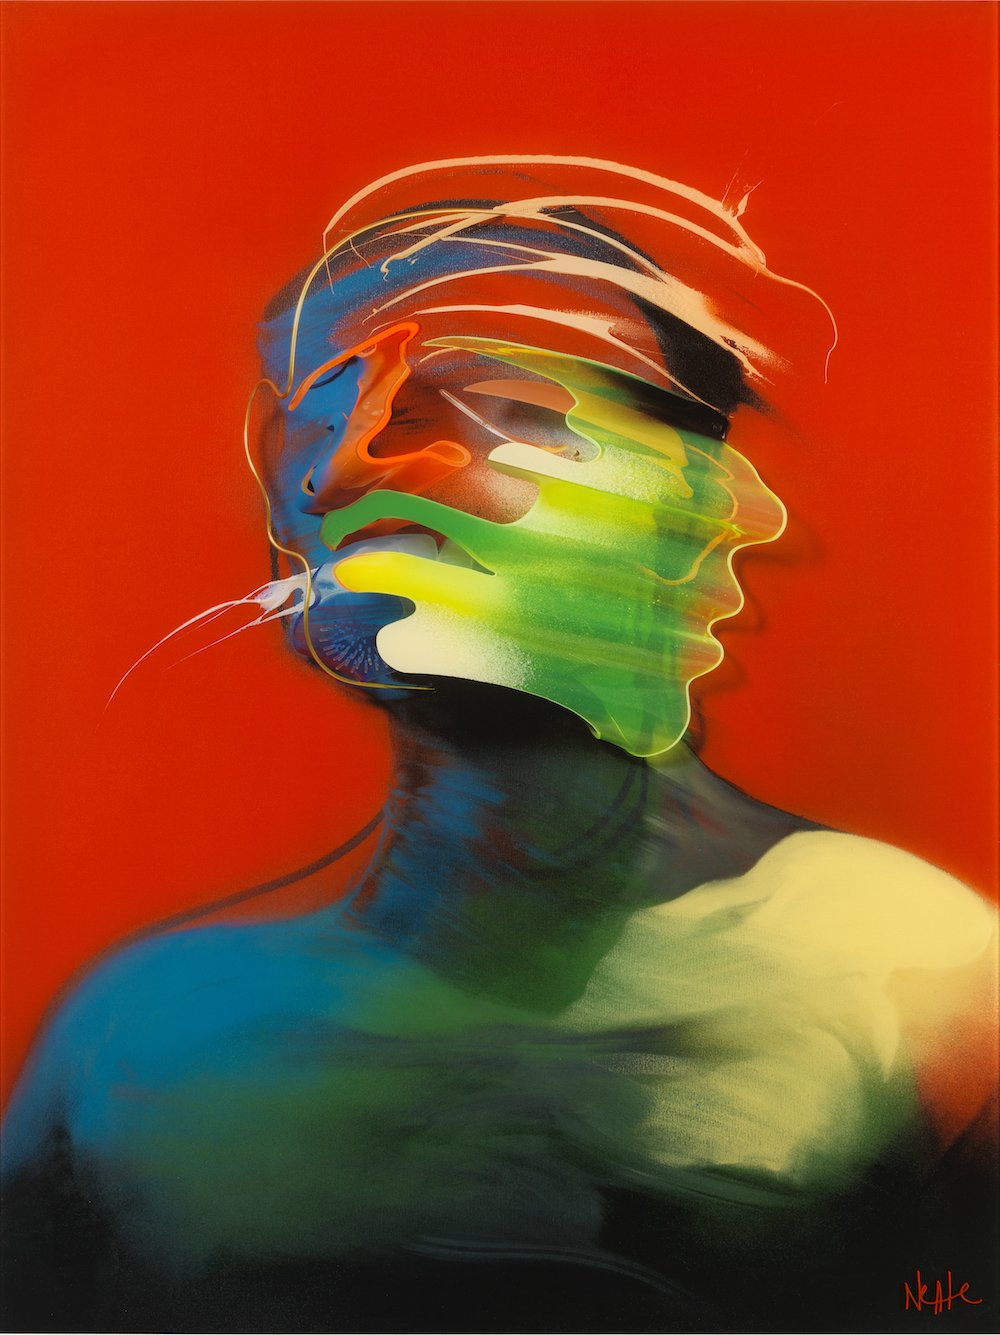 ADAM NEATE DIMENSIONAL EDITION limited editions FOR SALE FROM ELMS LESTERS